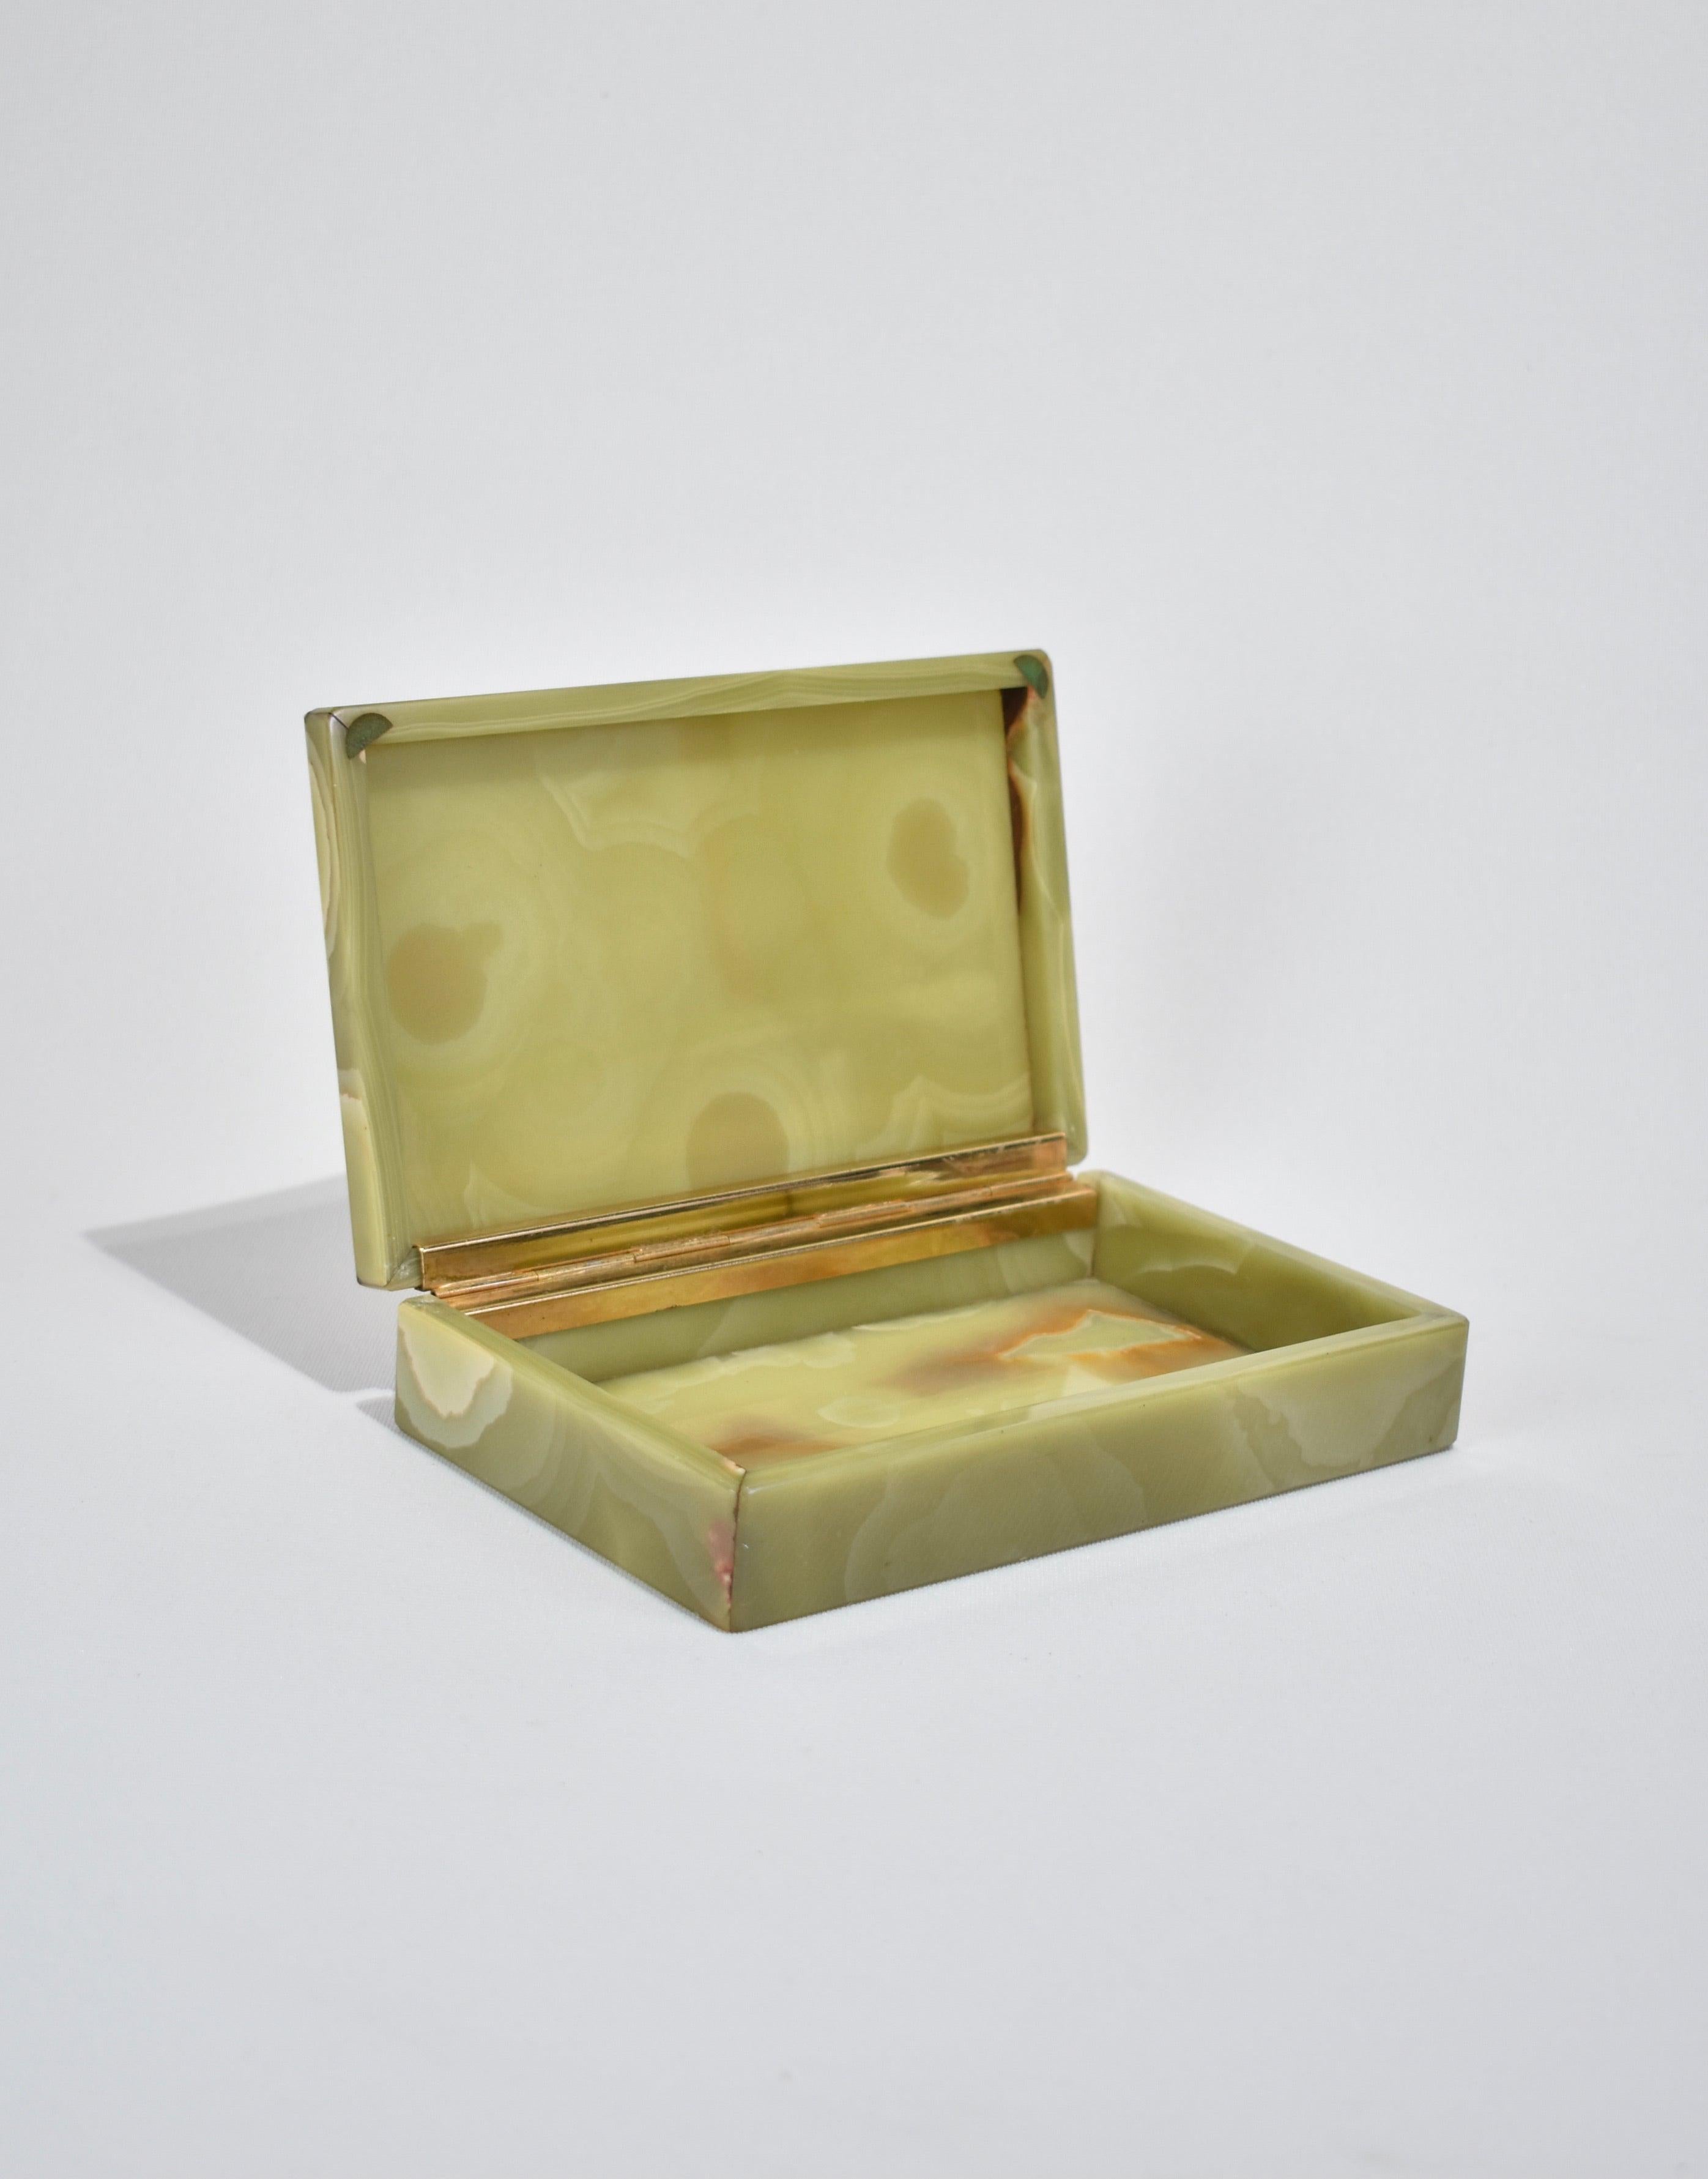 Stunning, polished green onyx box with hinged lid. Perfect size for jewelry or other small treasures. Made in Italy, ca. 1940s.